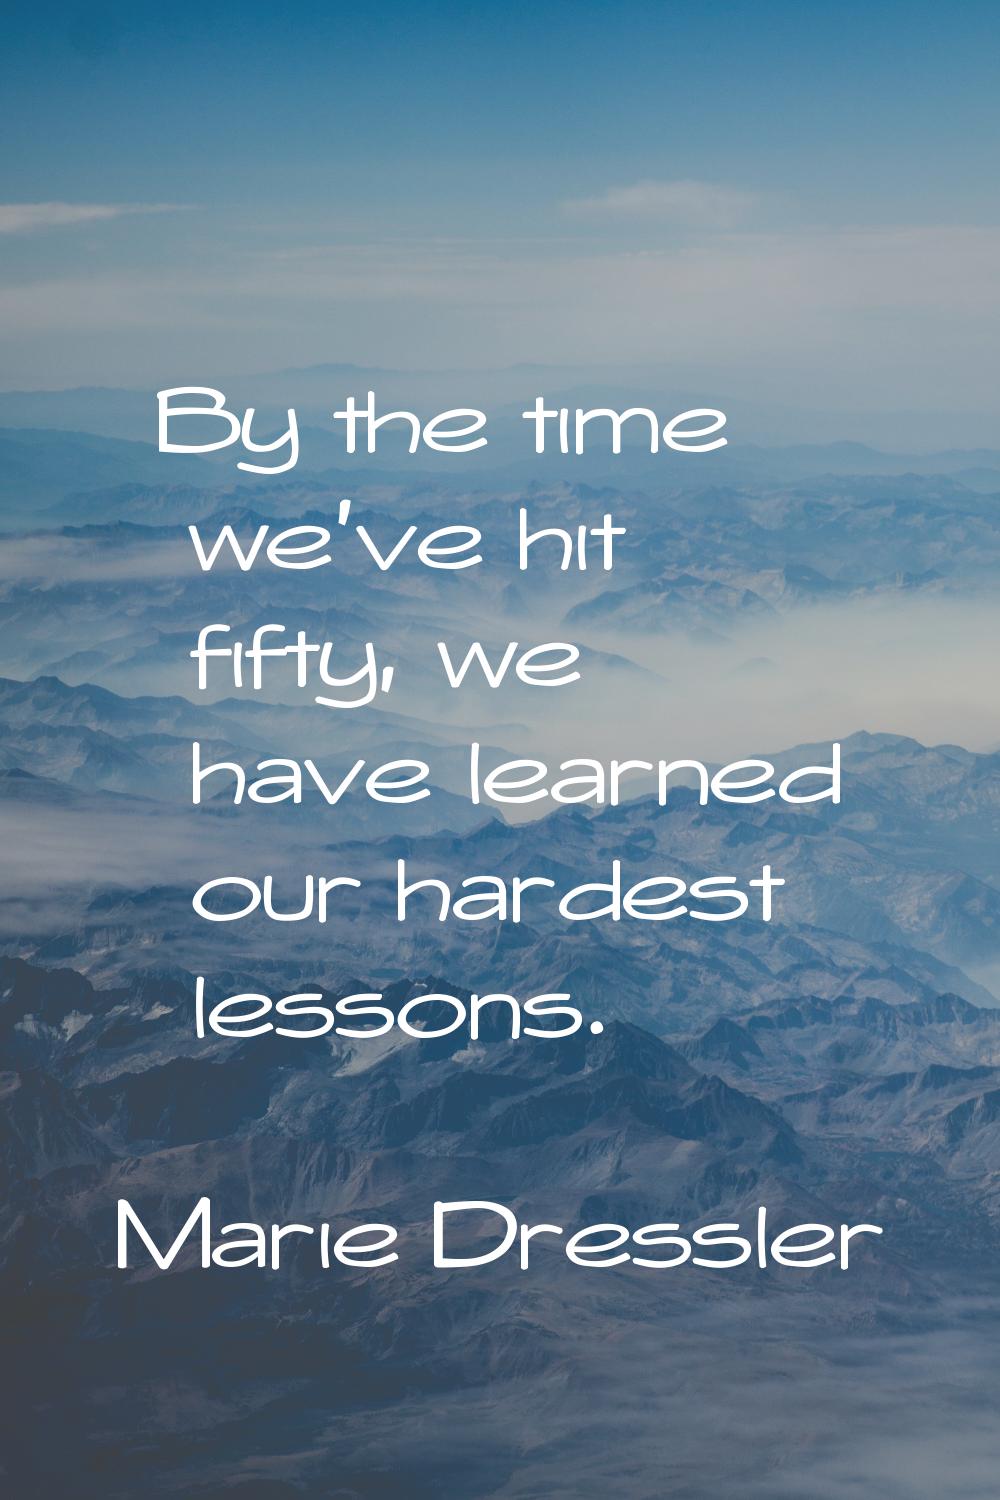 By the time we've hit fifty, we have learned our hardest lessons.